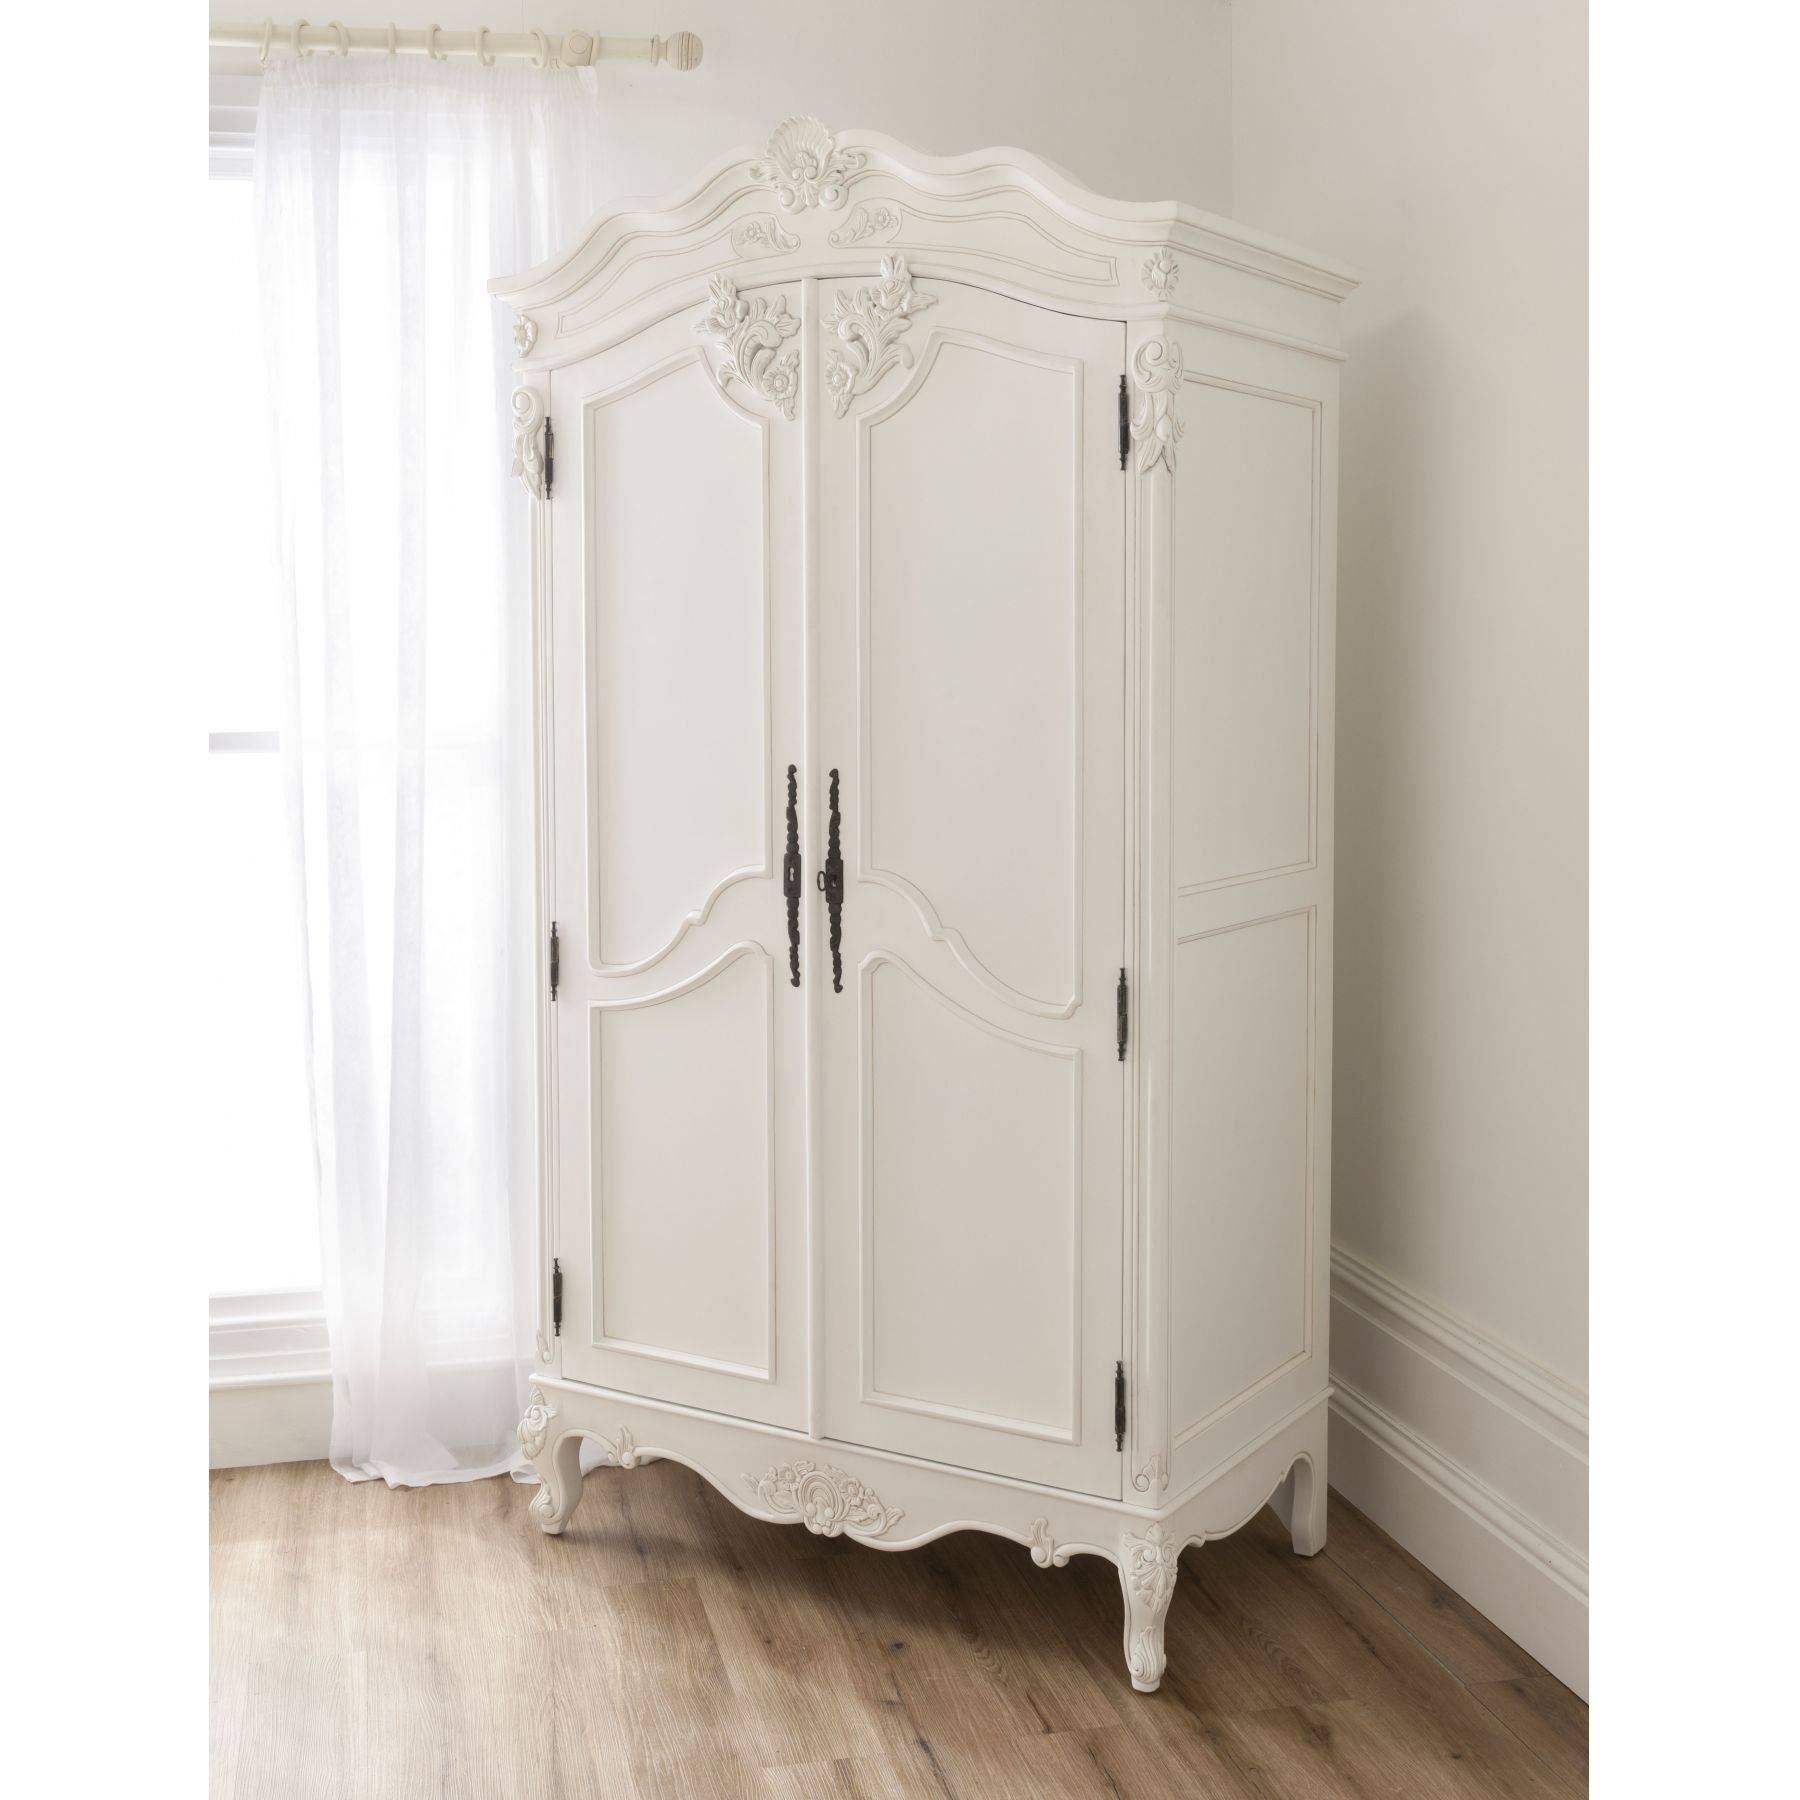 Get Bold – Select A White Wardrobe For Your Room – Tcg In Ornate Wardrobes (View 12 of 15)